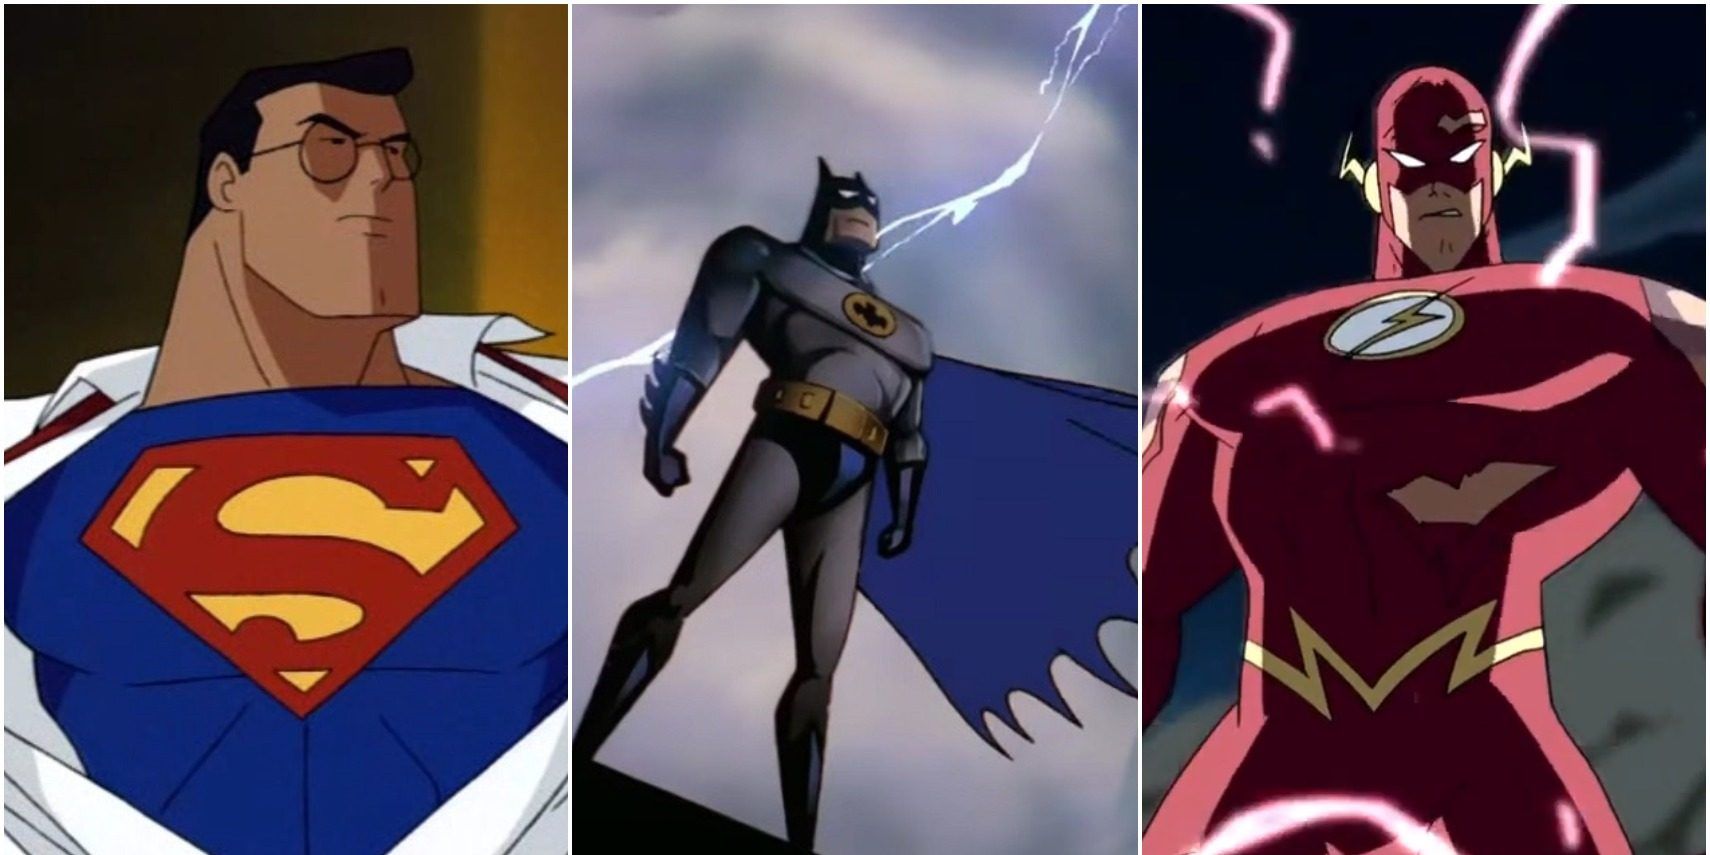 Batman: The Animated Series & Every Other Show In The DCAU